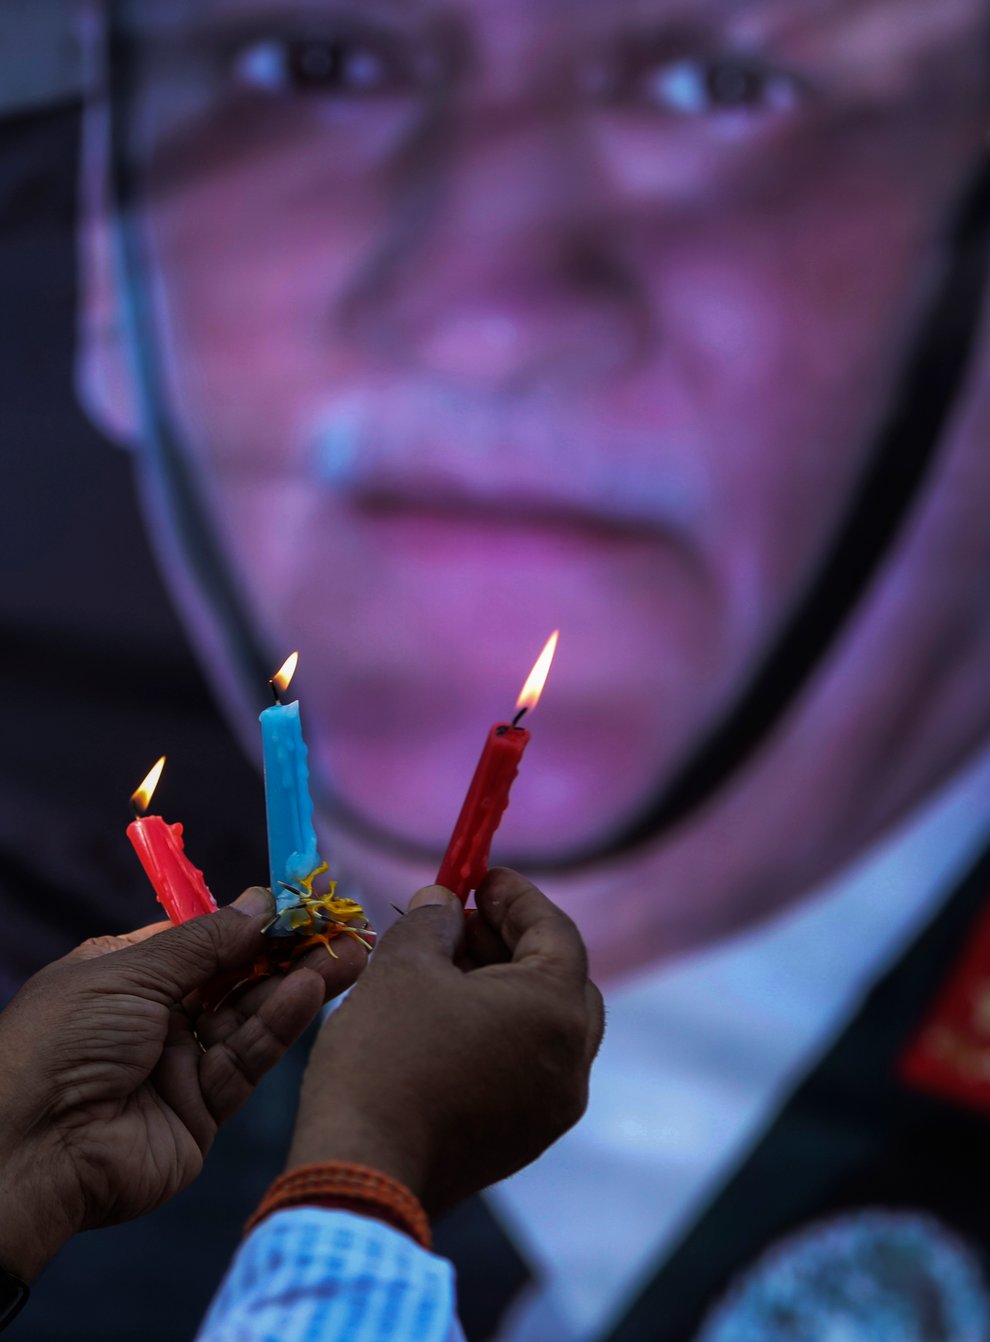 General Bipin Rawat died when his helicopter crashed in a forest (AP Photo/Channi Anand)